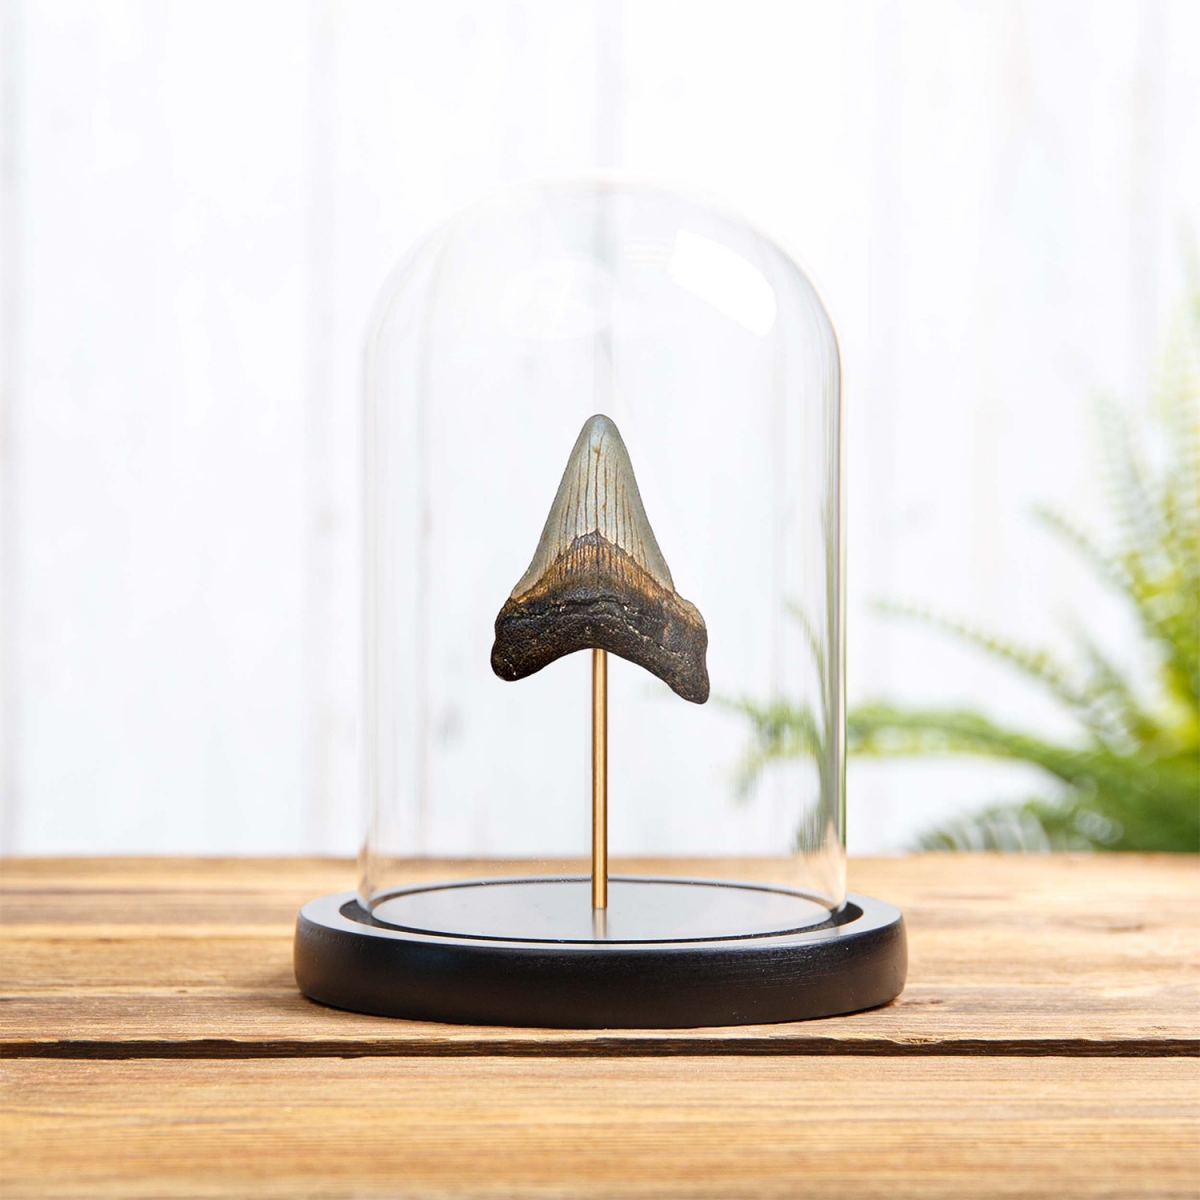 Minibeast Medium Megalodon Shark Tooth Fossil in Glass Dome with Wooden Base (Carcharodon megalodon)